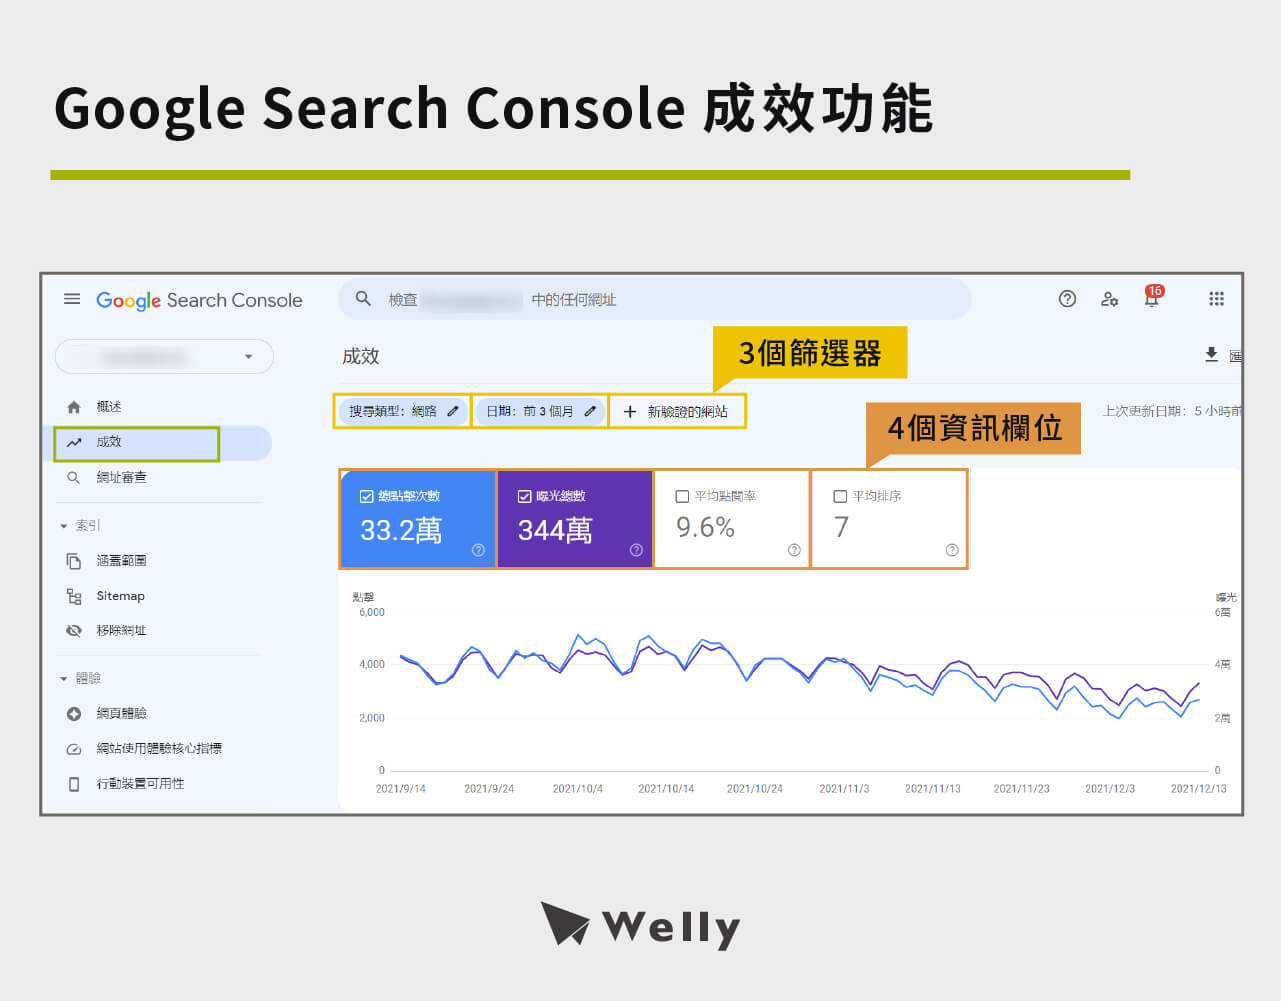 Google Search Console 成效功能報表示範圖